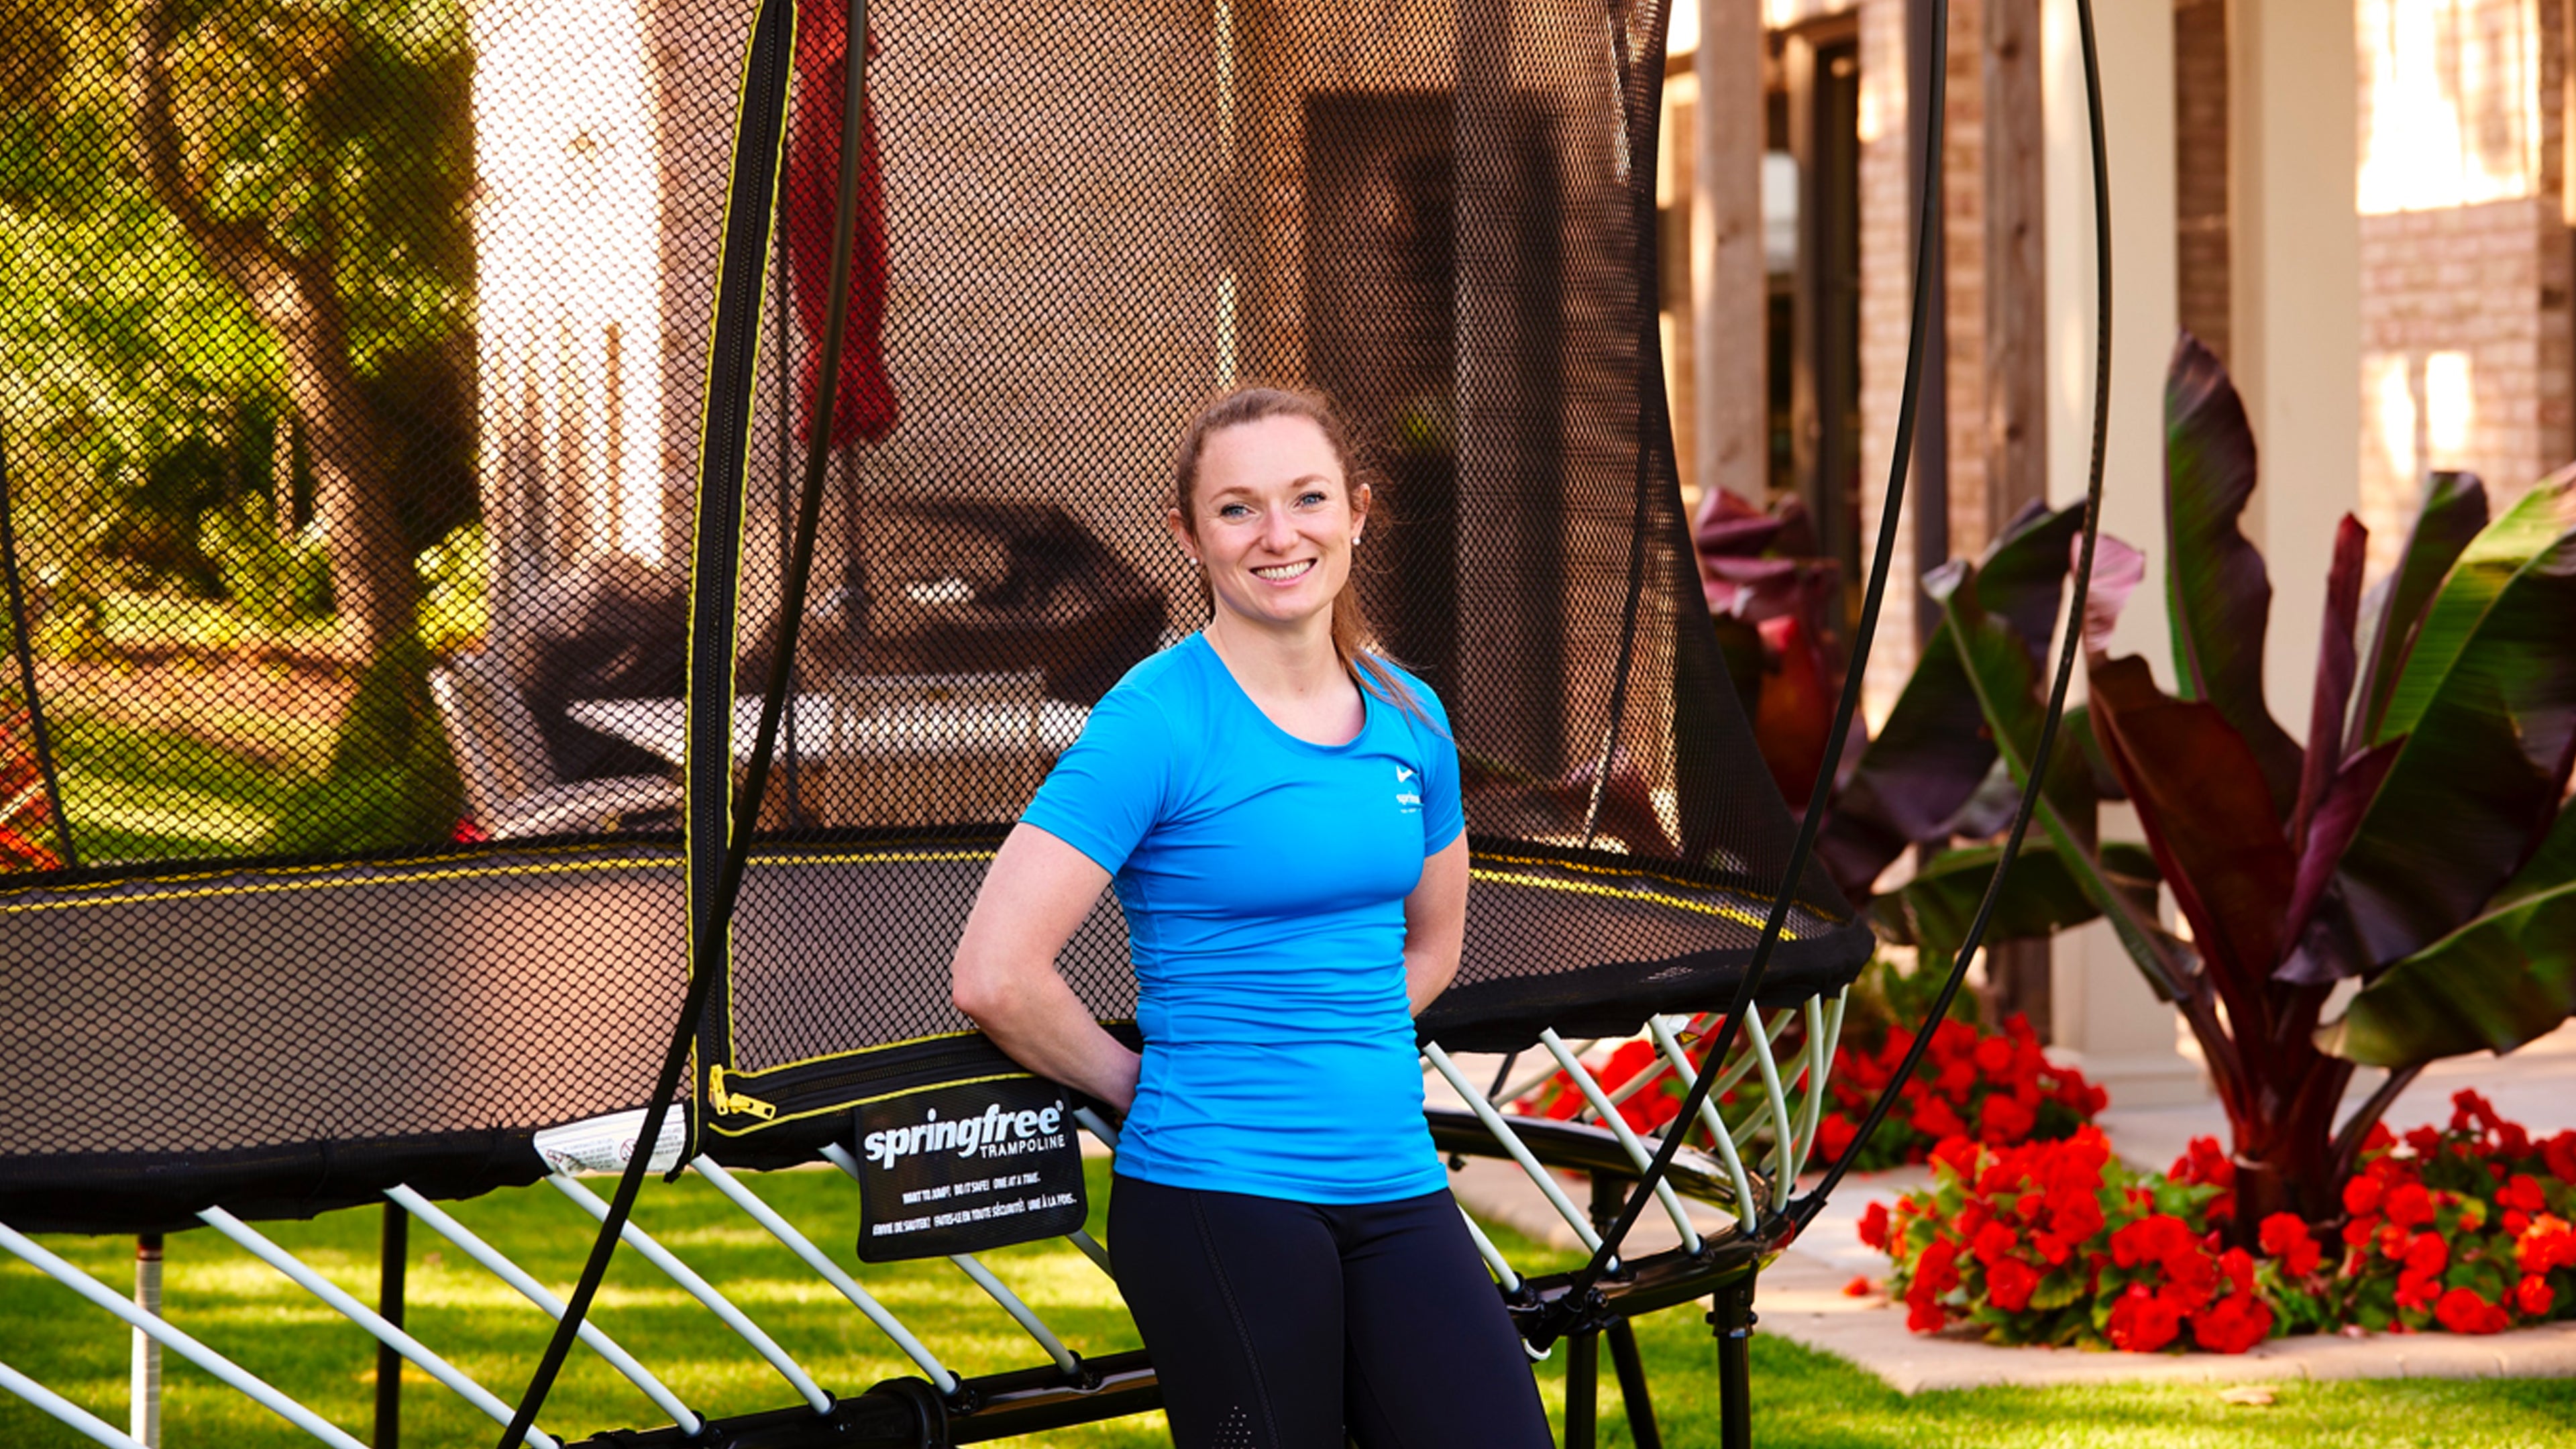 Training from Home with Guest Blogger & Canadian Athlete, Rosie MacLennan